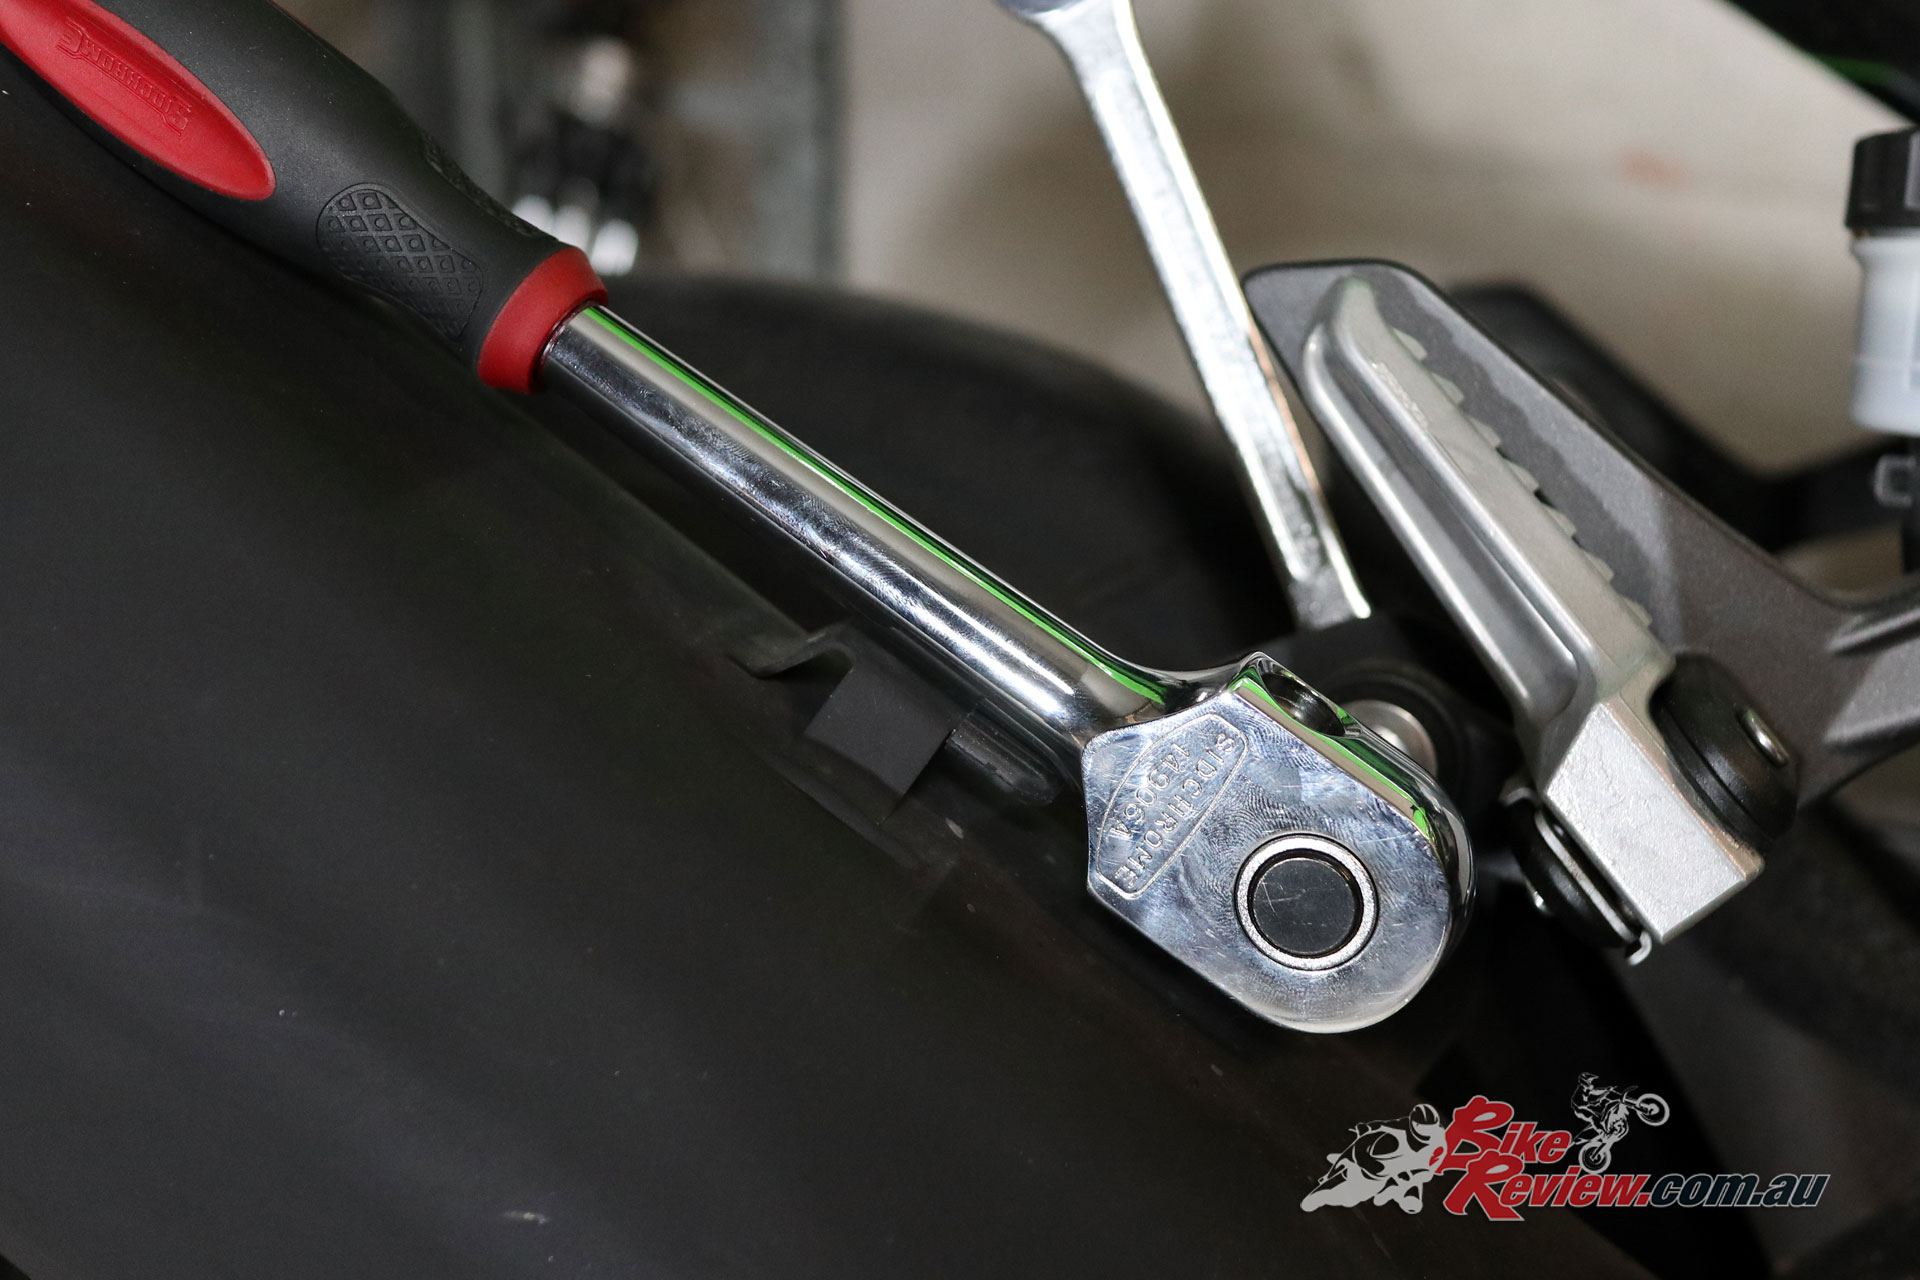 Undo the stock exhaust's mounting point on the pillion hanger